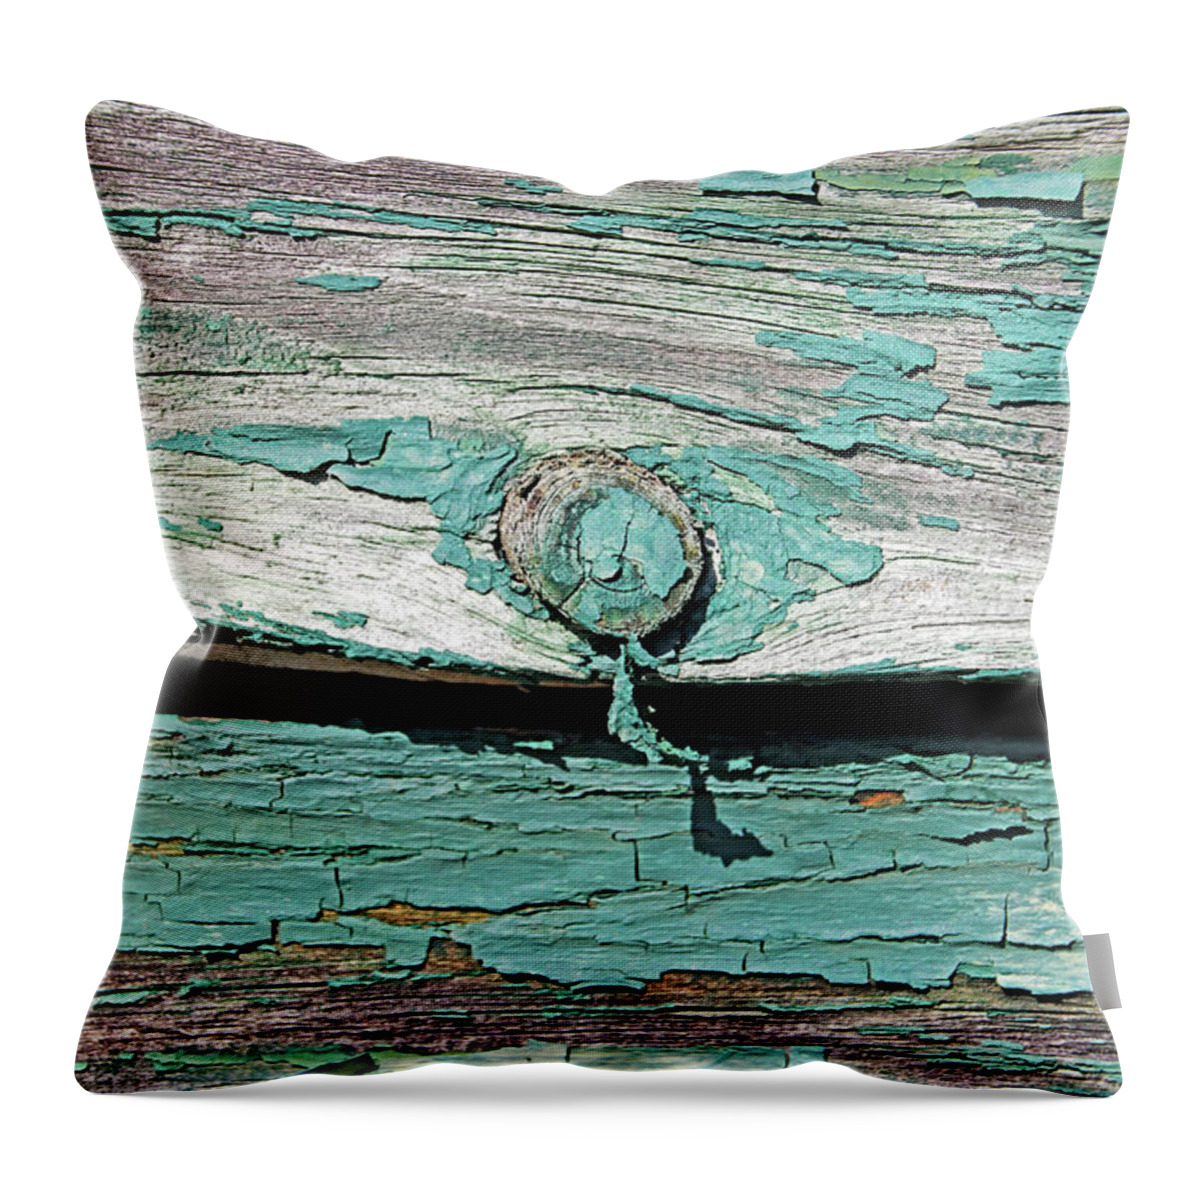 Wood Throw Pillow featuring the photograph Peeling Paint by Debbie Oppermann